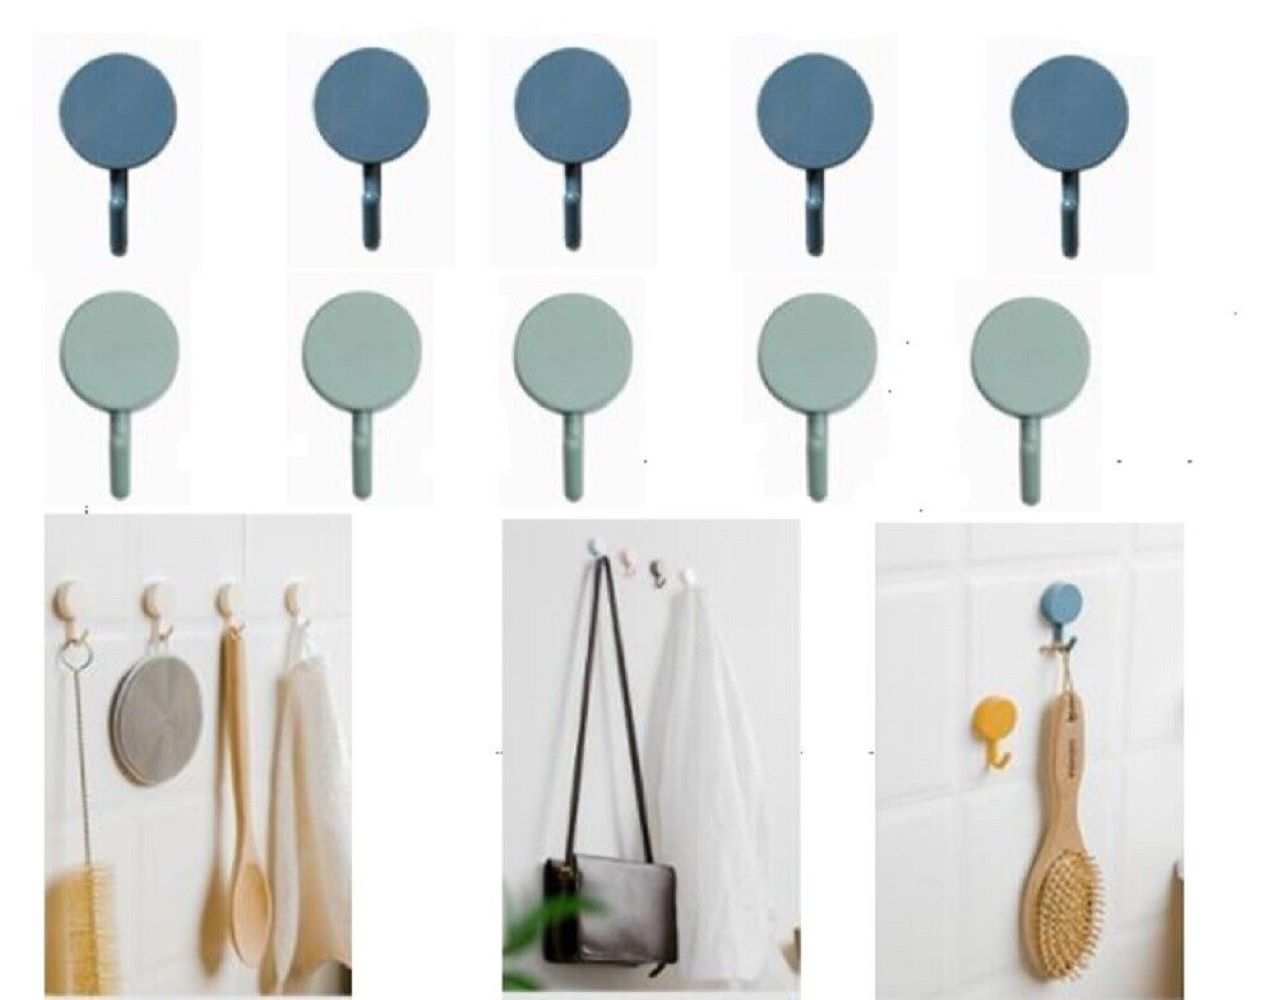 12 Pcs Wall Sticky for Hanging Suction Cup Hooks Heavy Duty Picture Frames Traceless Hangers Nail-free Screw Stickers PVC, Size: 6x6cm, Other